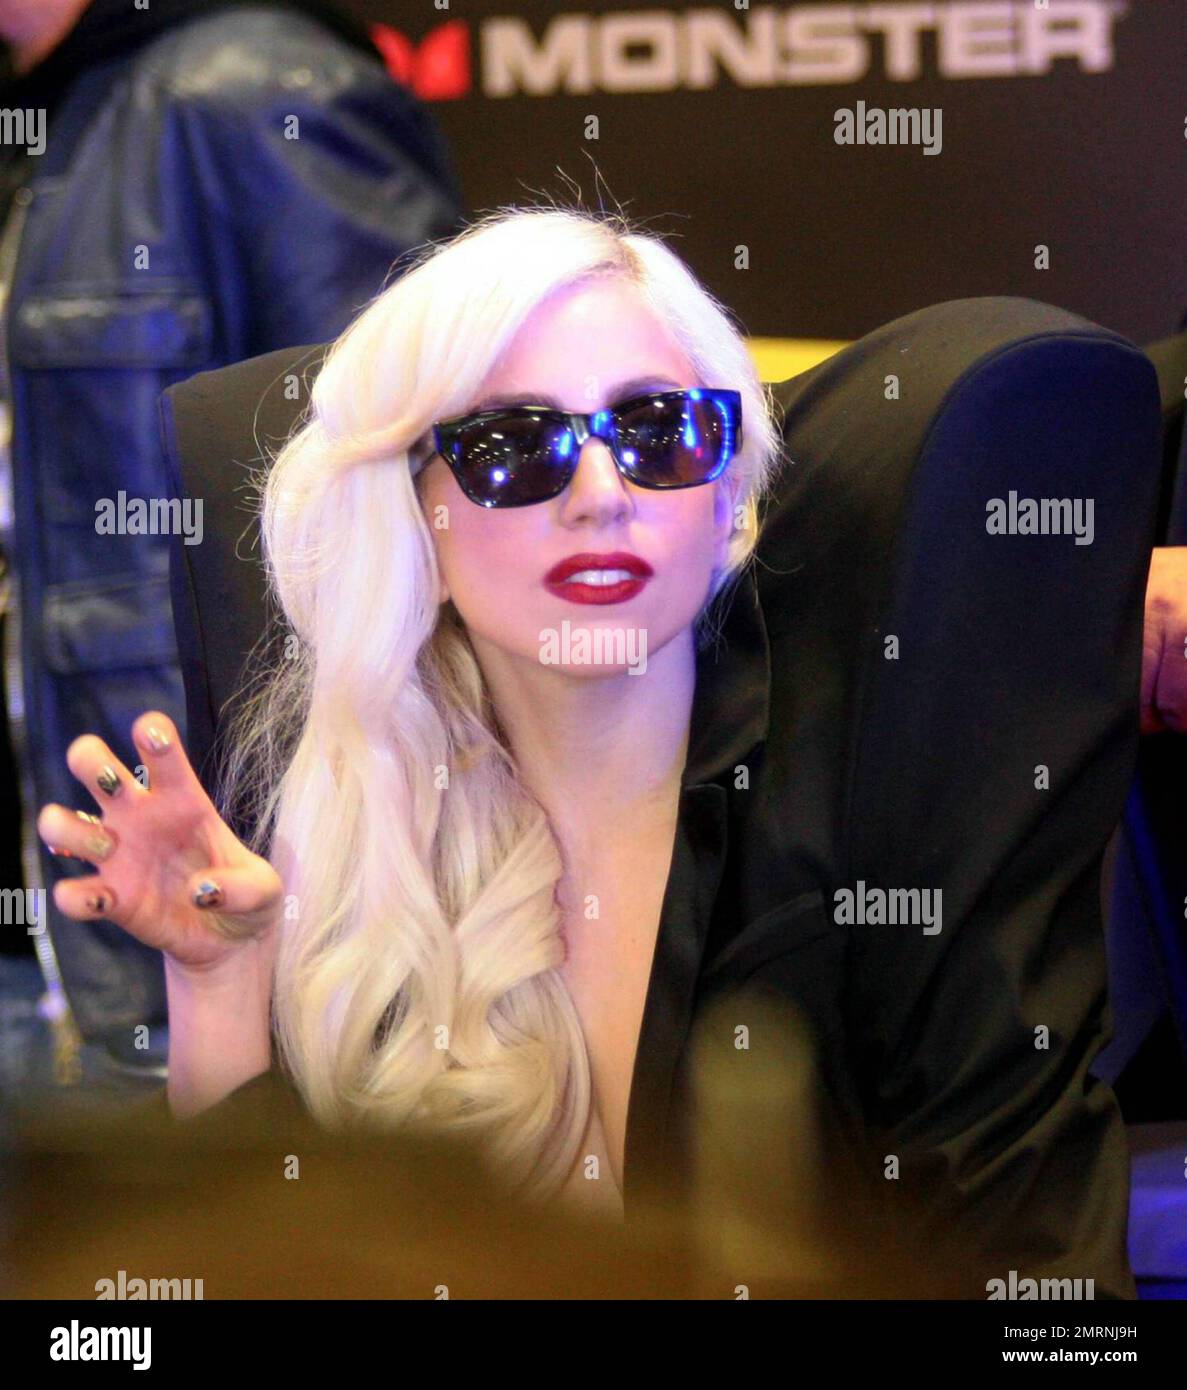 Lady Gaga meets her fans at electronics store Best Buy in Los Angeles. The singer, real name Stefani Joanne Angelina Germanotta, was at the store to sign copies of her latest album entitled 'The Fame Monster.' Los Angeles, CA. 11/23/09. Stock Photo